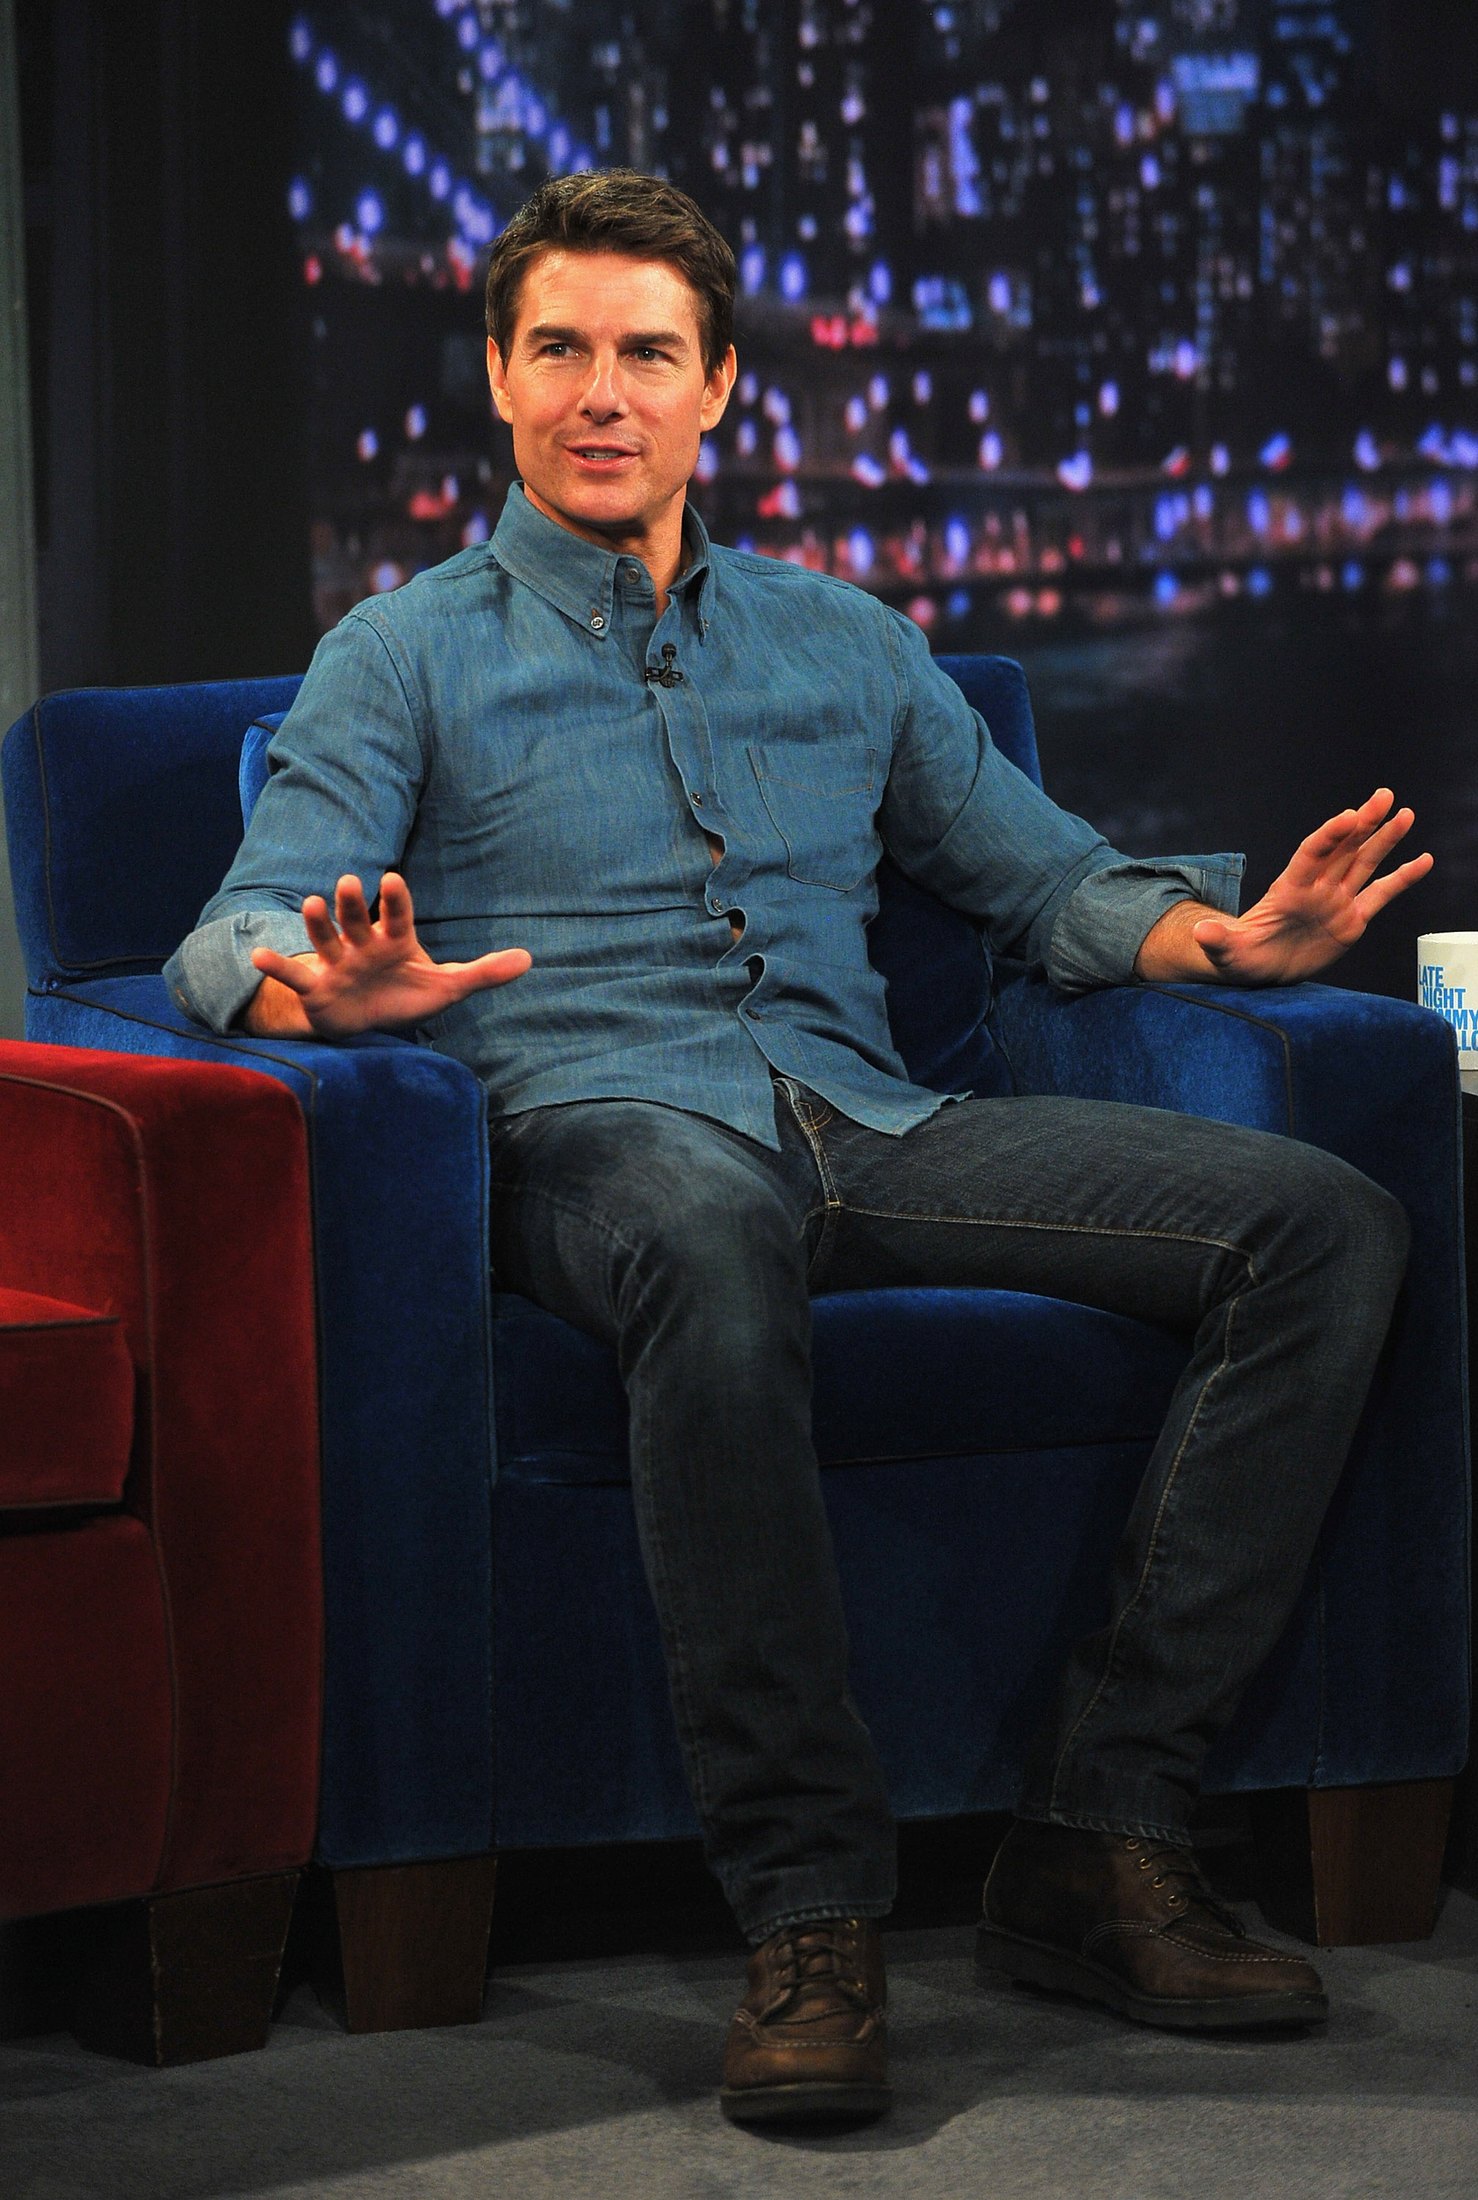 late-night-with-jimmy-fallon-april12-2013-013.jpg